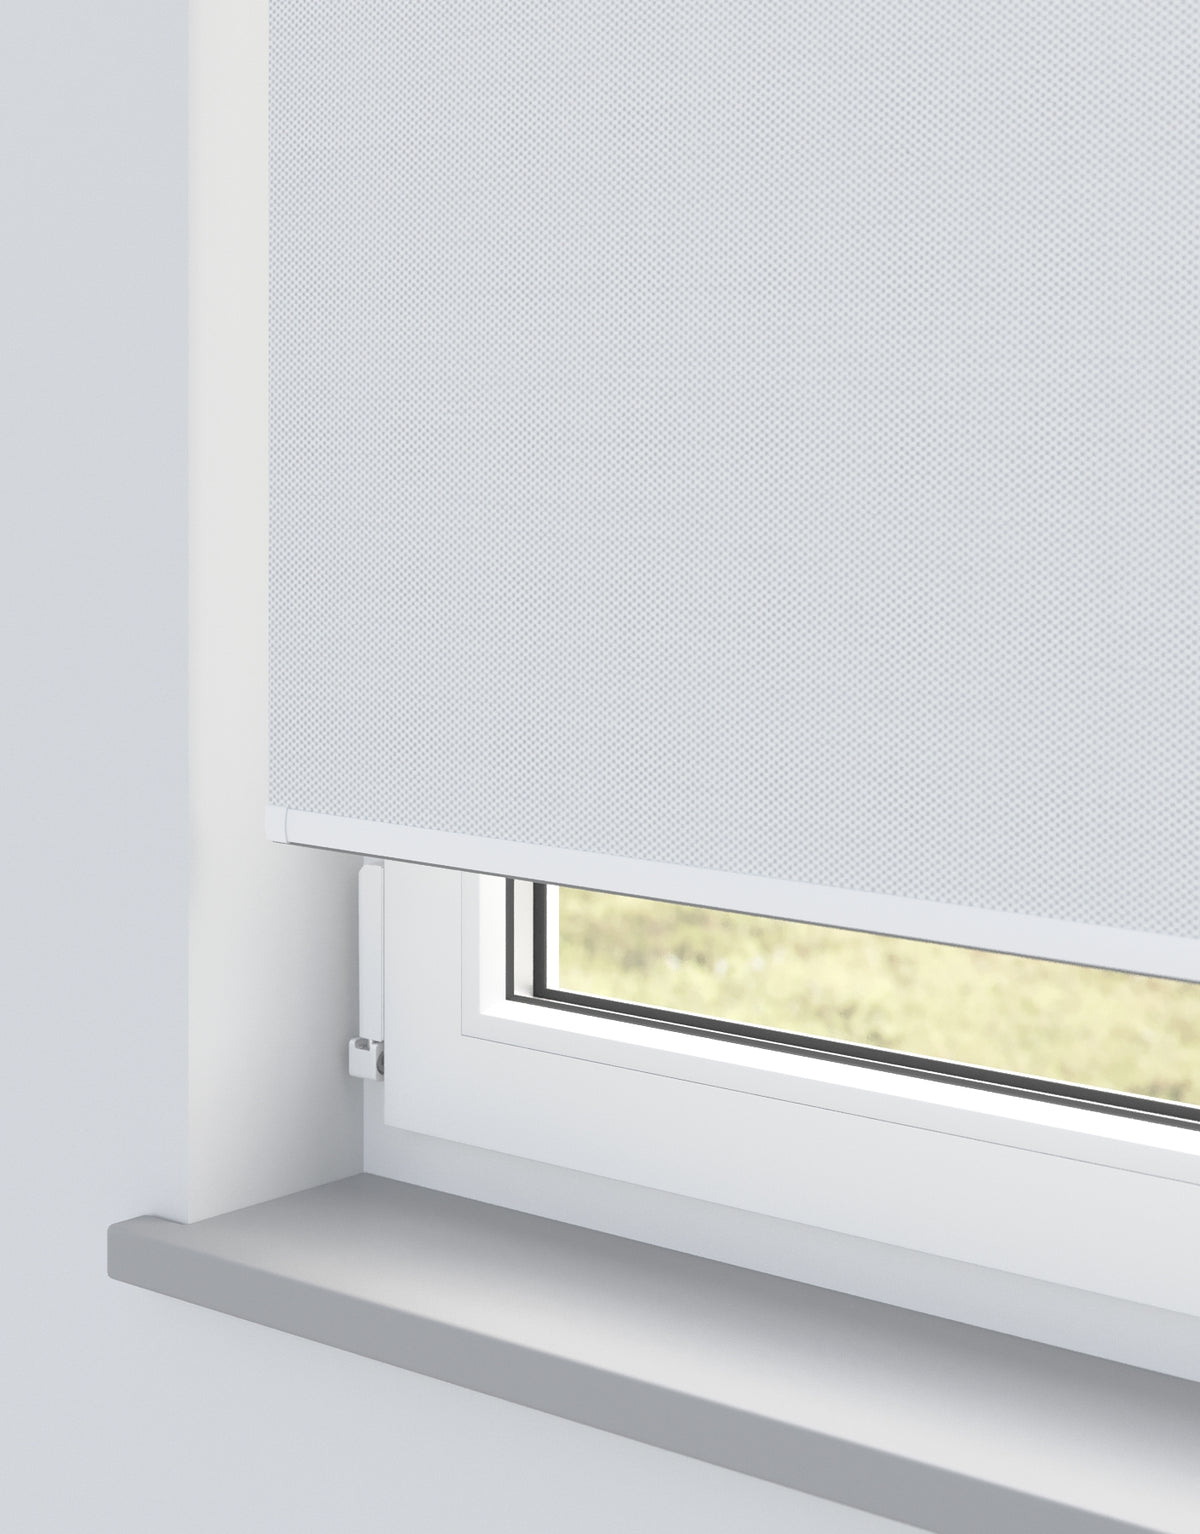 Panama Pro 1 White Pearl Roller Blind